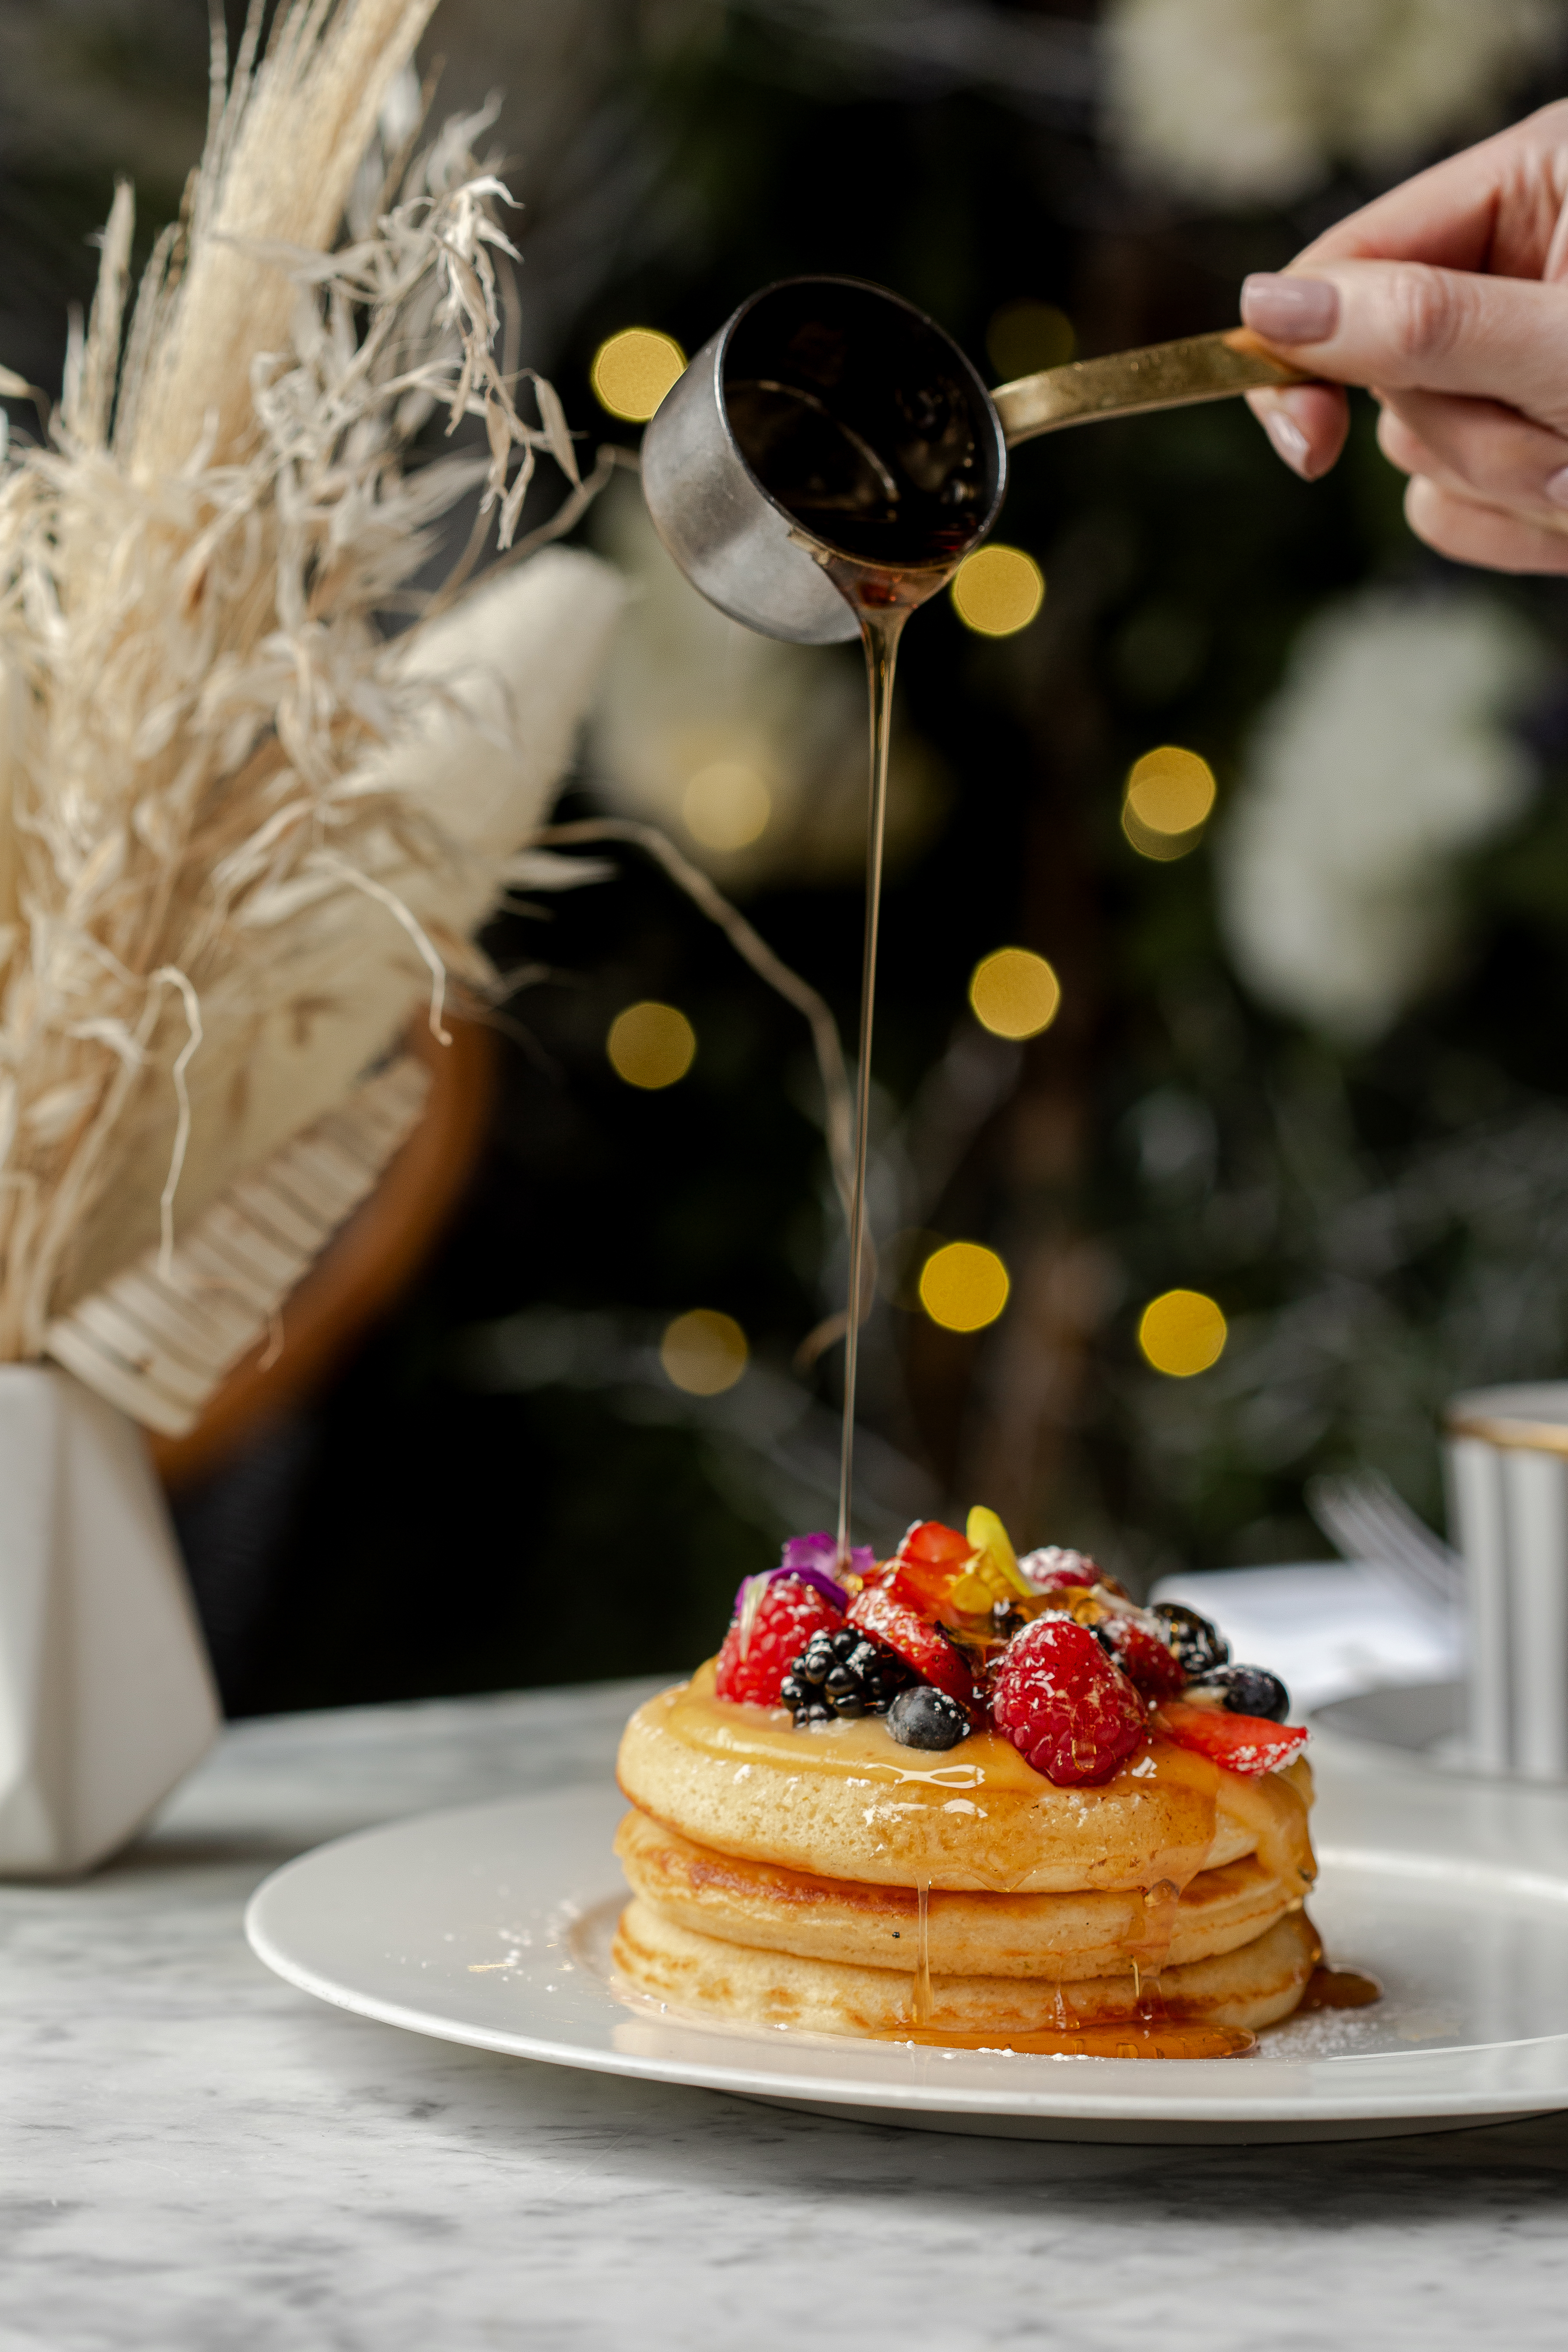 Top London chefs reveal delicious recipes for Pancake Day 2021